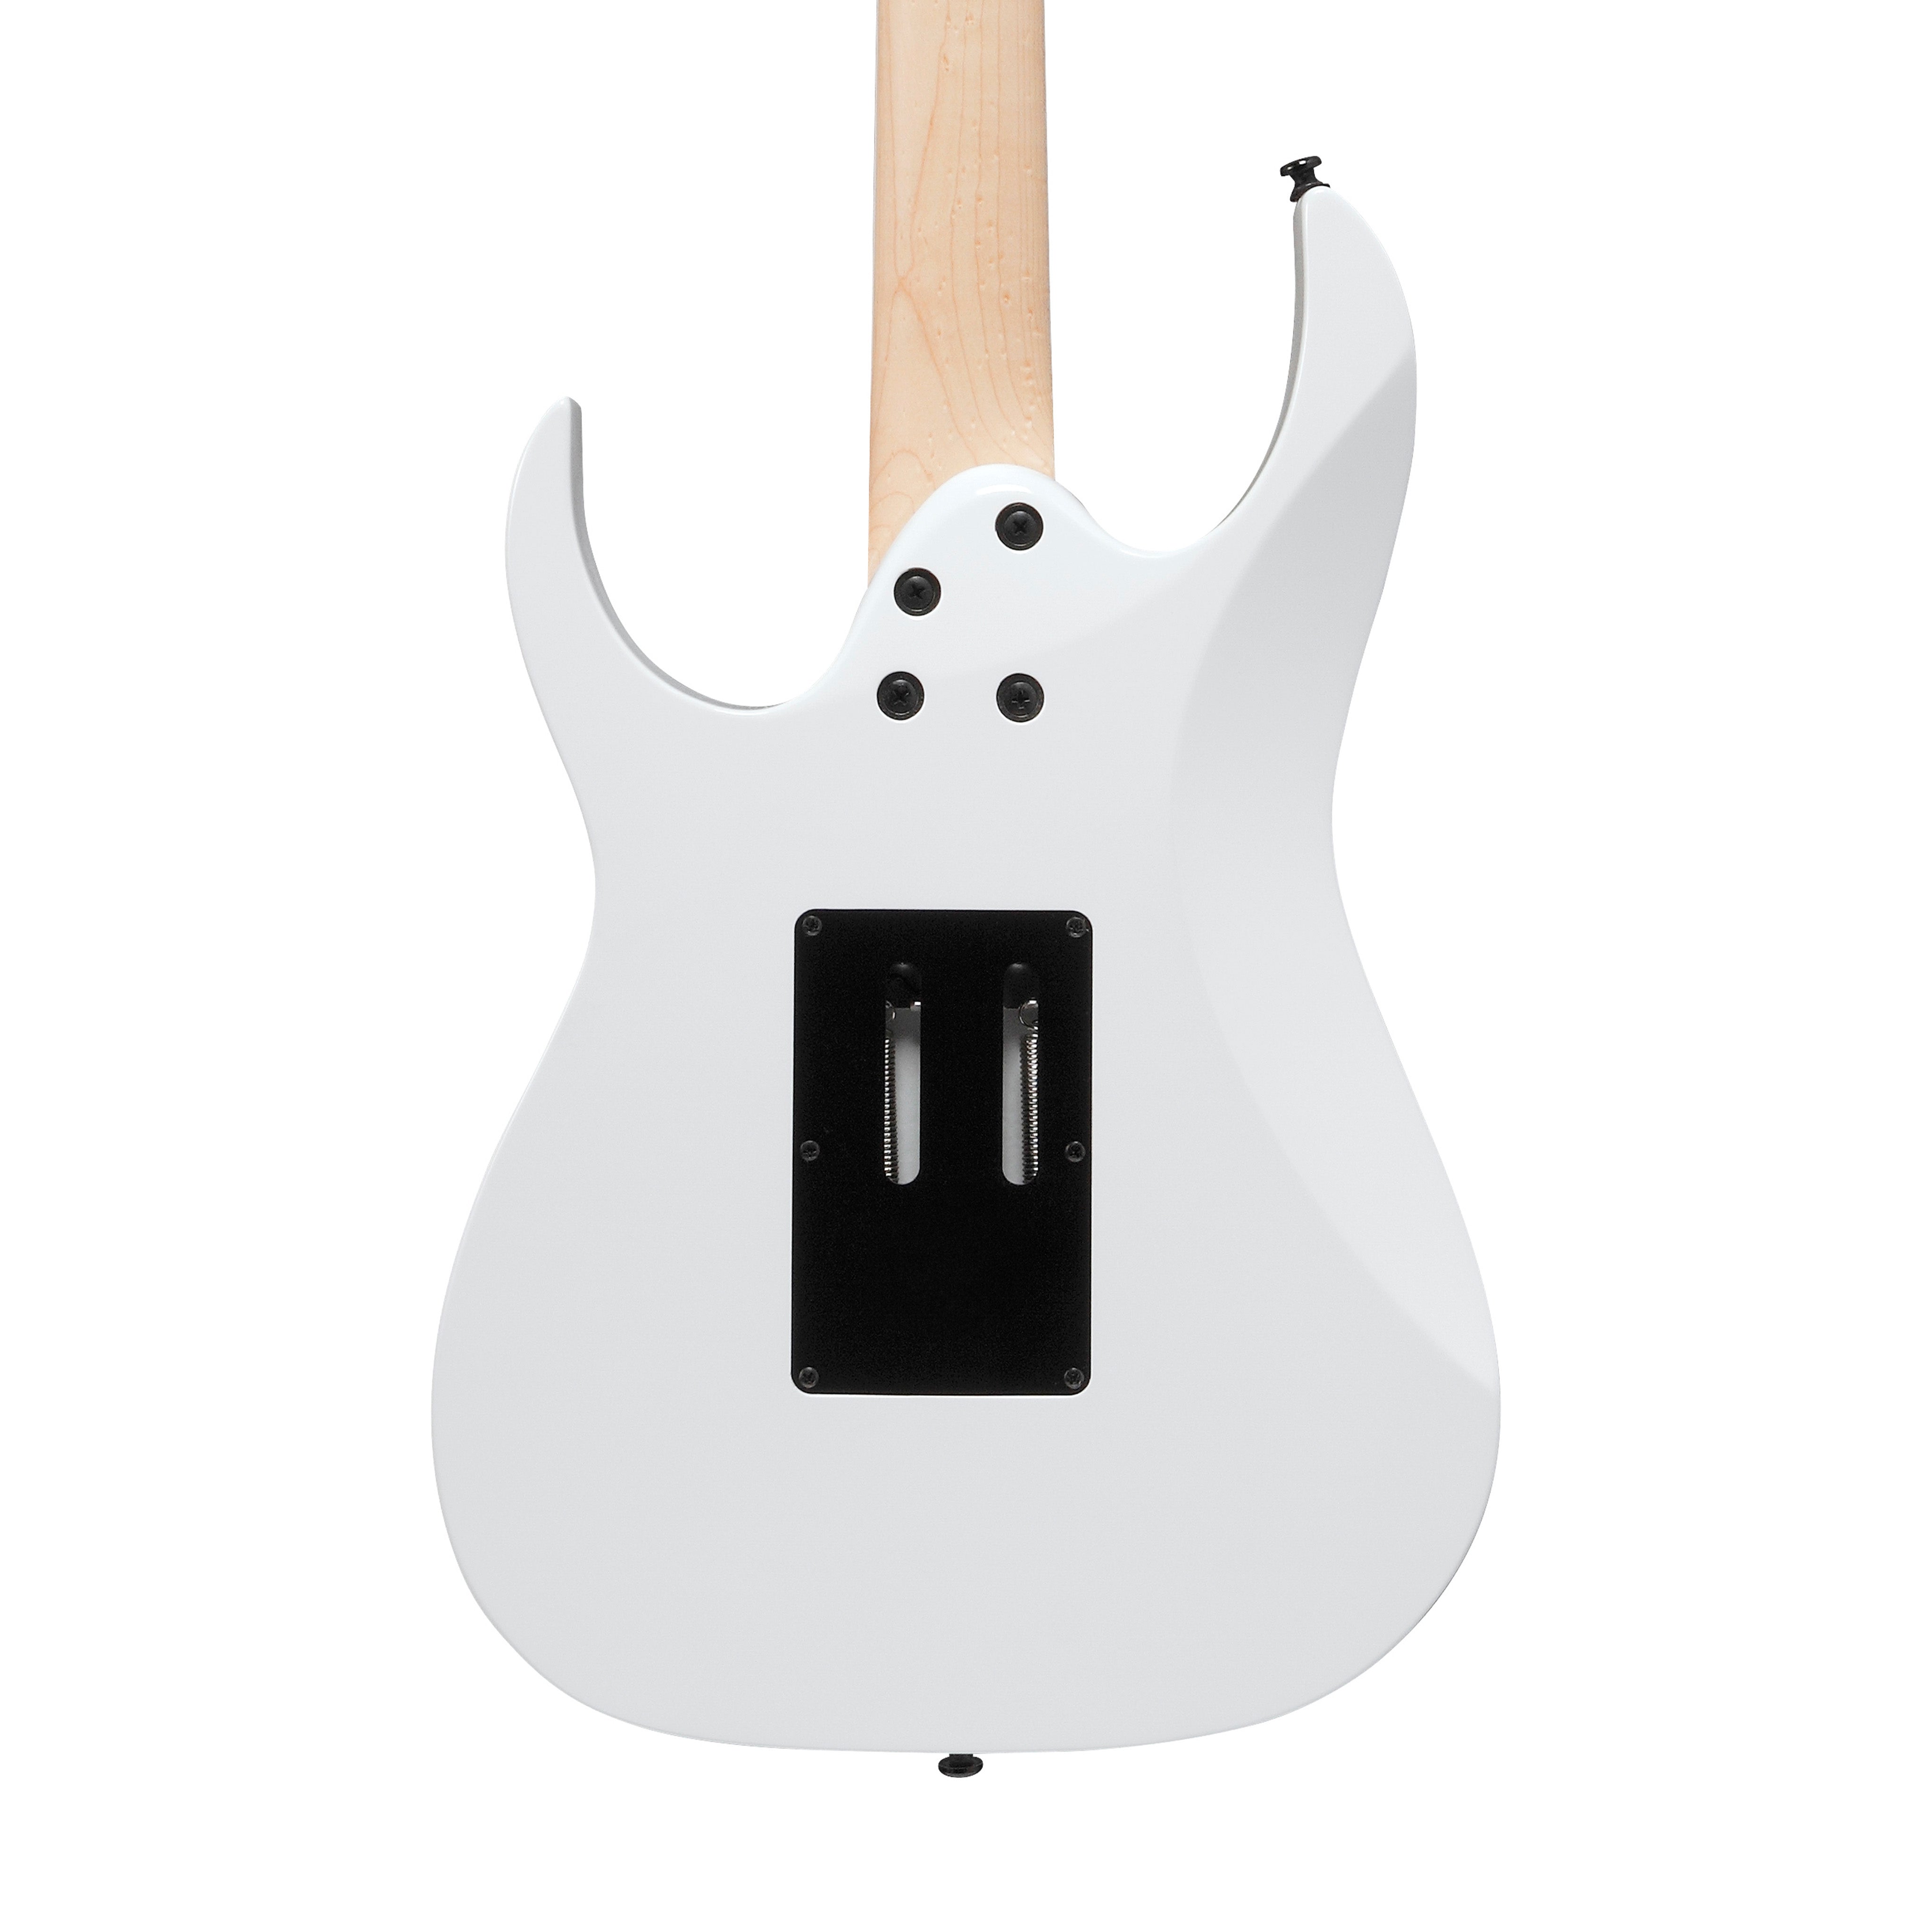 Ibanez RG450DXB-WH Electric Guitar, White